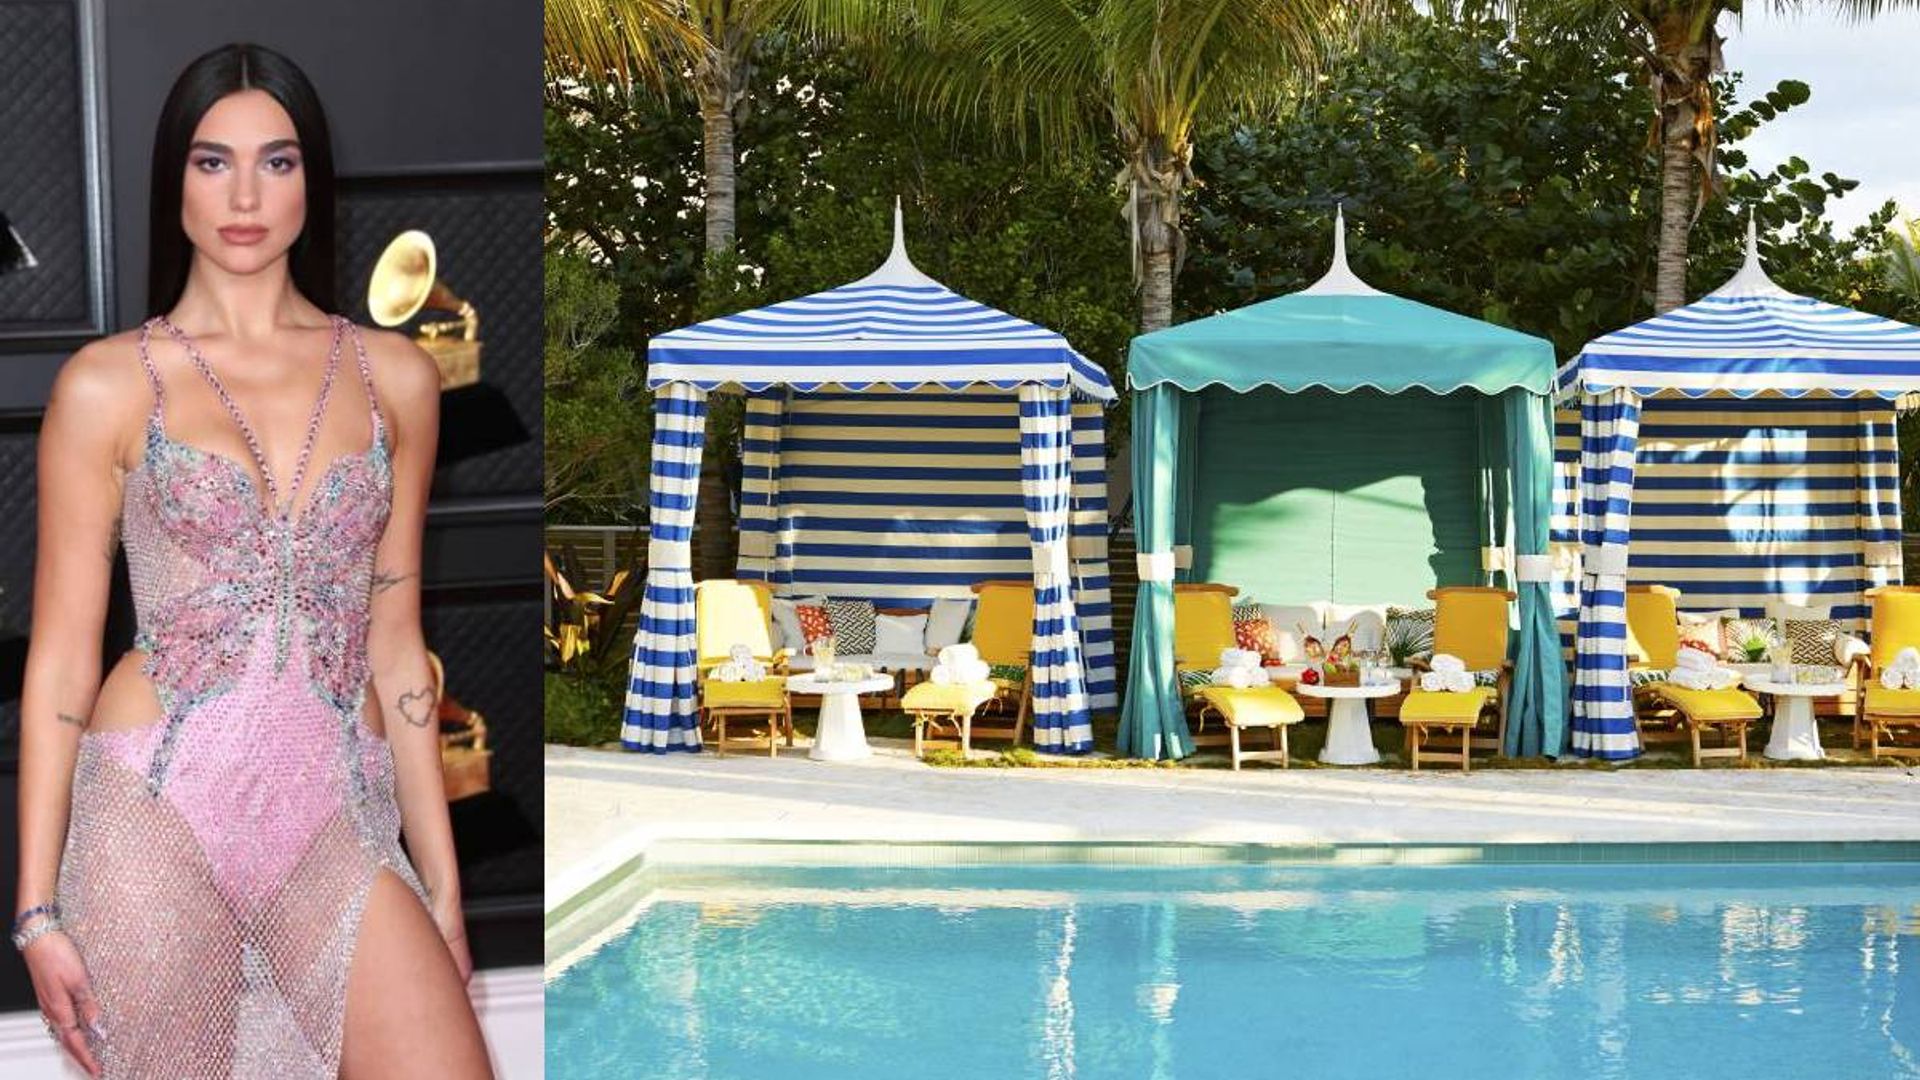 Dua Lipa filmed her poolside music video at this chic Miami oceanfront hotel perfect for staycations